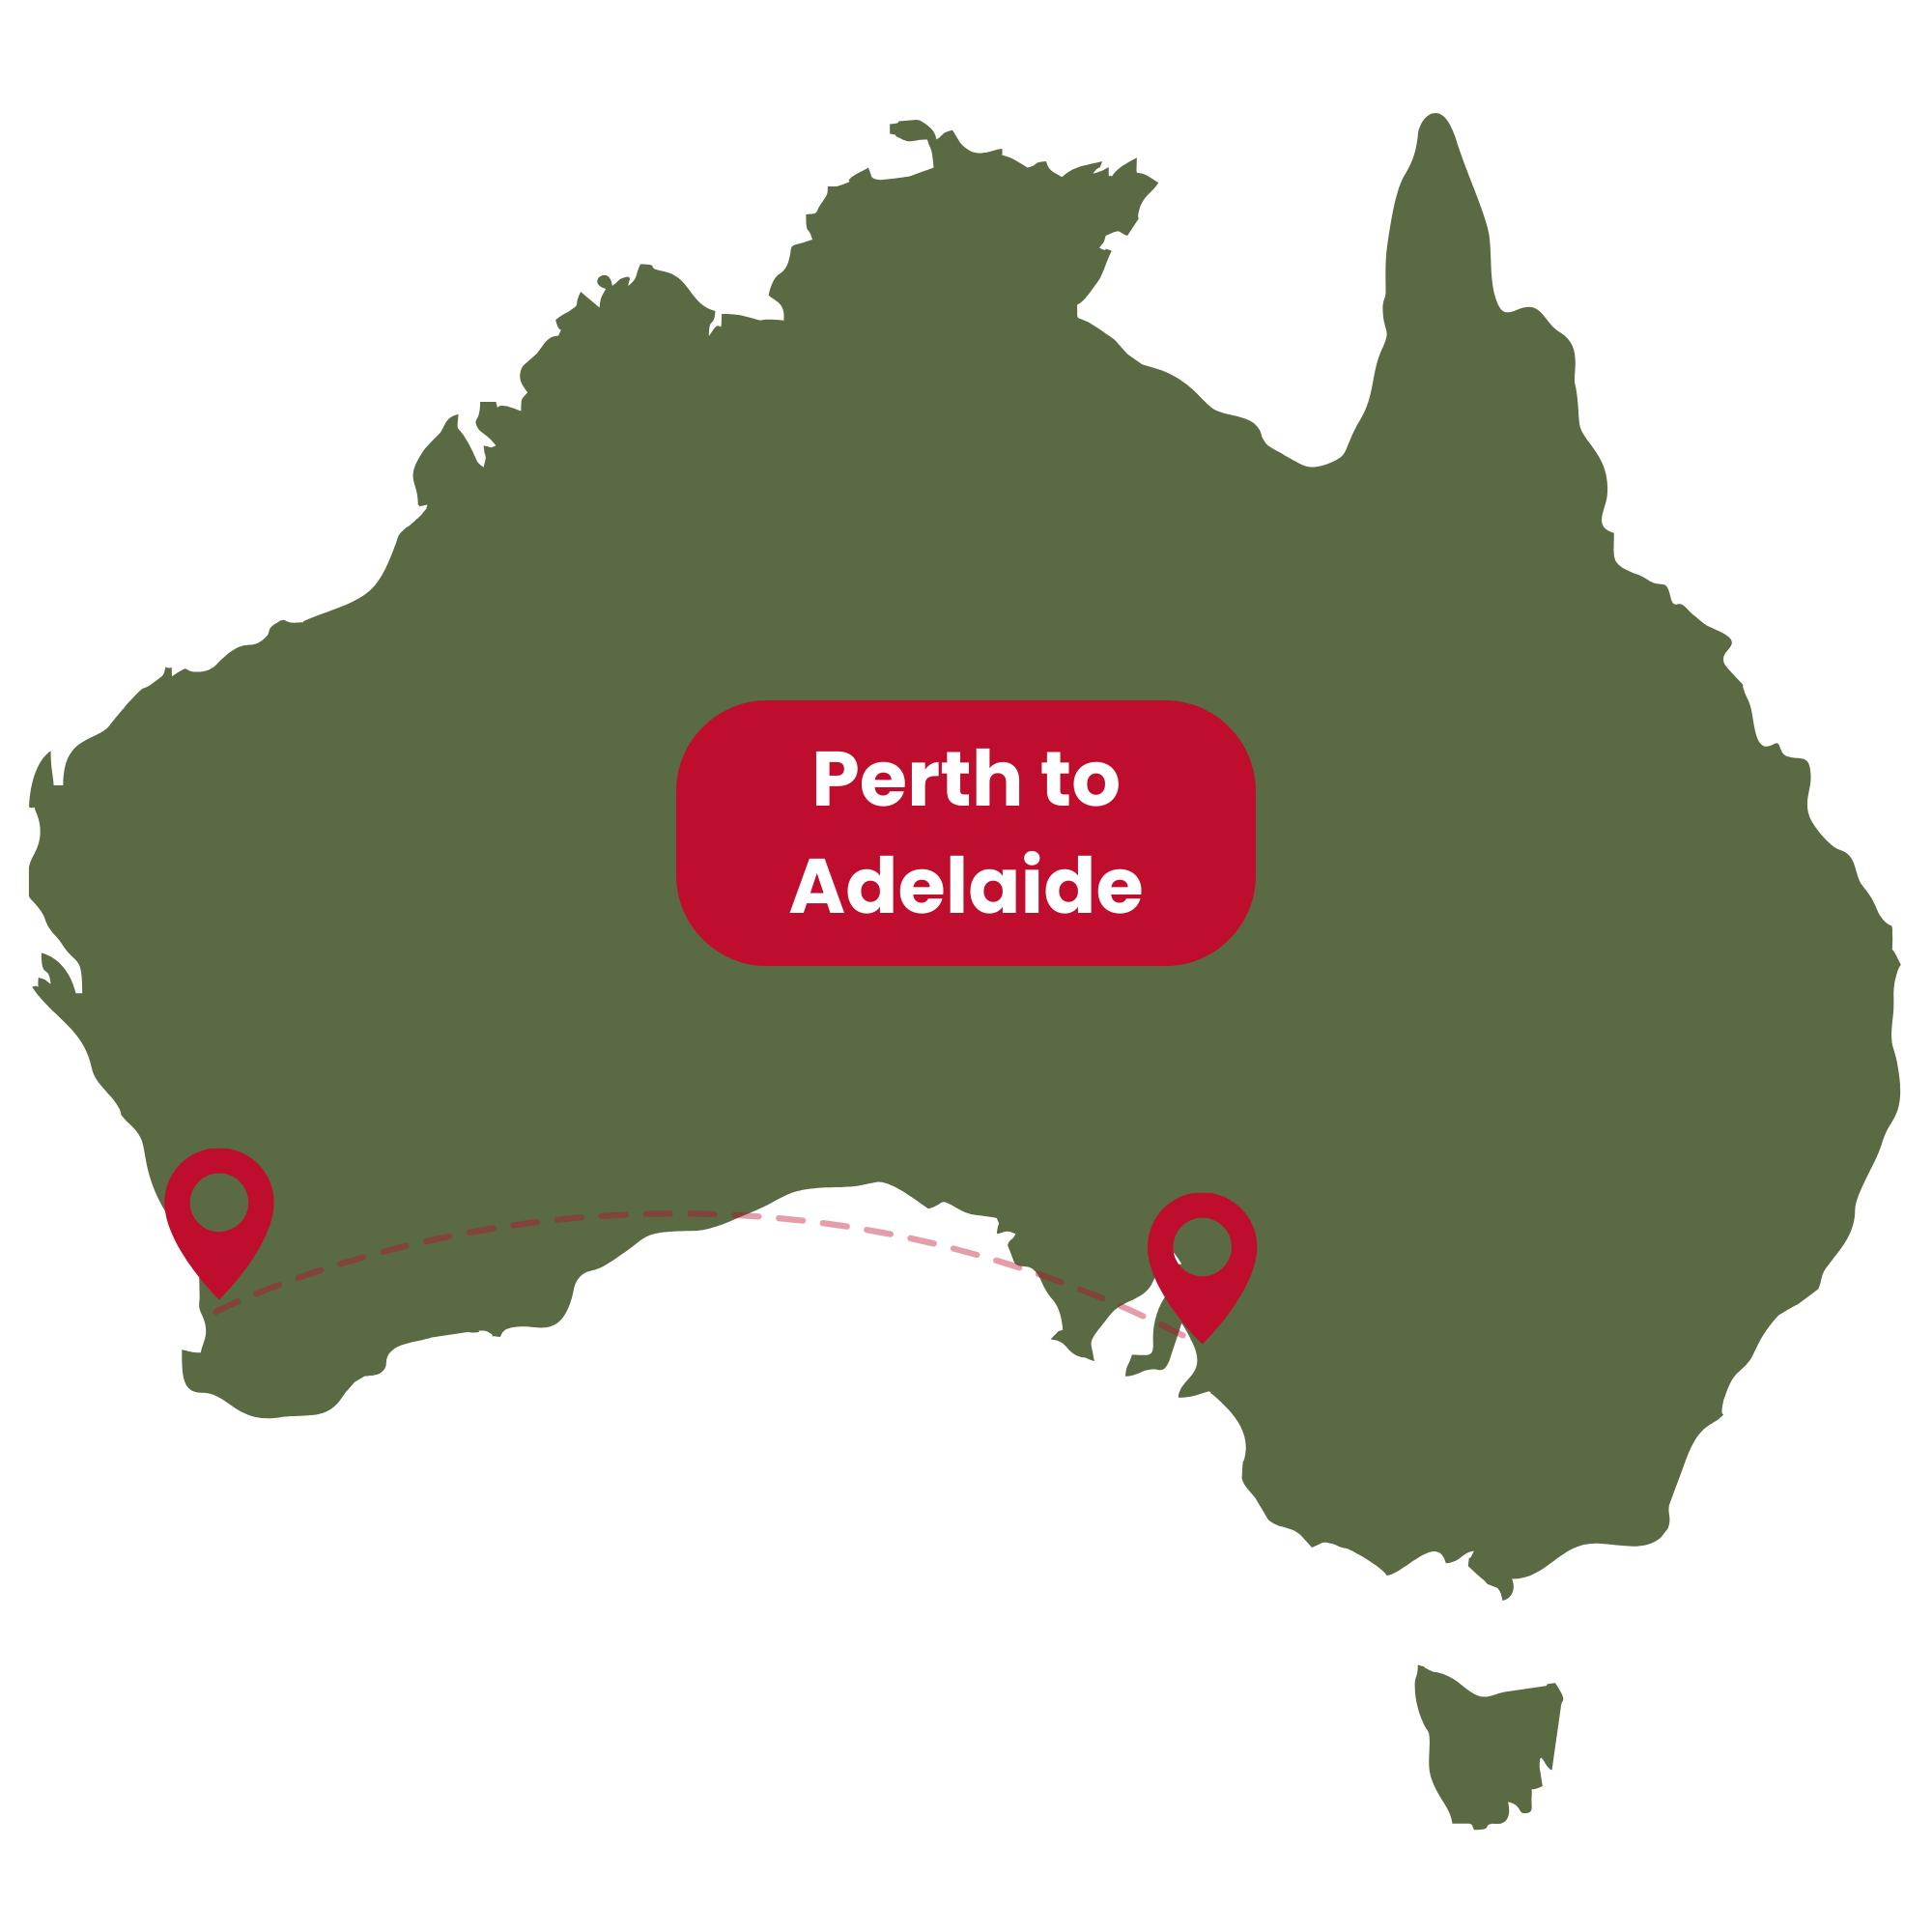 Perth to Adelaide repatriation map.